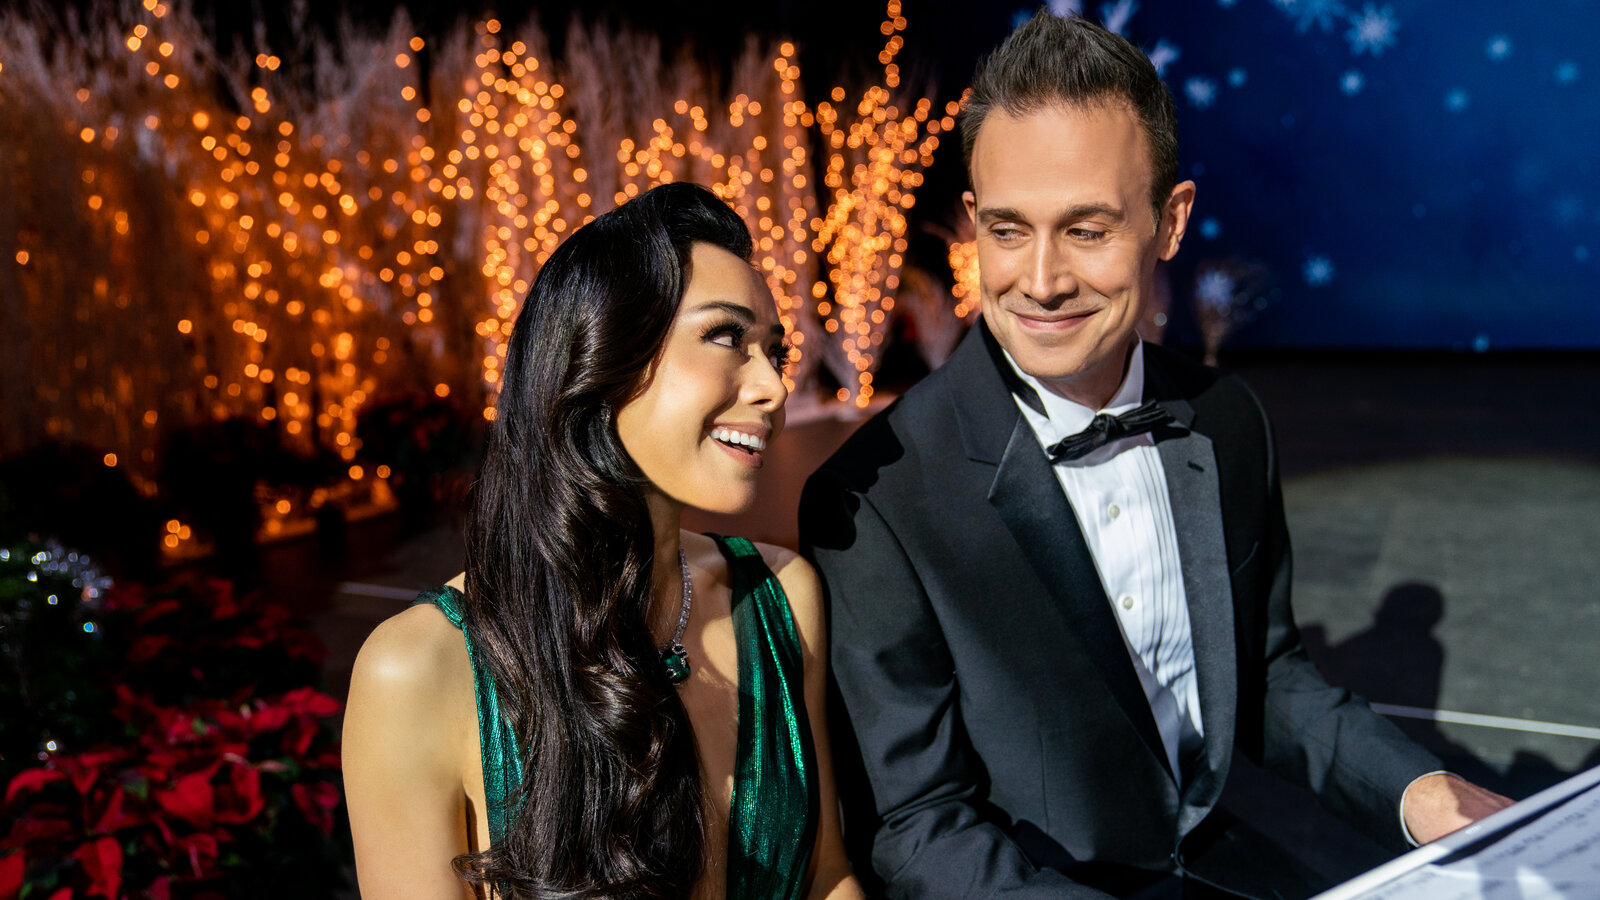 Cozy Up on the Couch and Watch ‘Christmas With You’ – A Netflix film starring Aimee Garcia and Freddie Prinze, Jr.